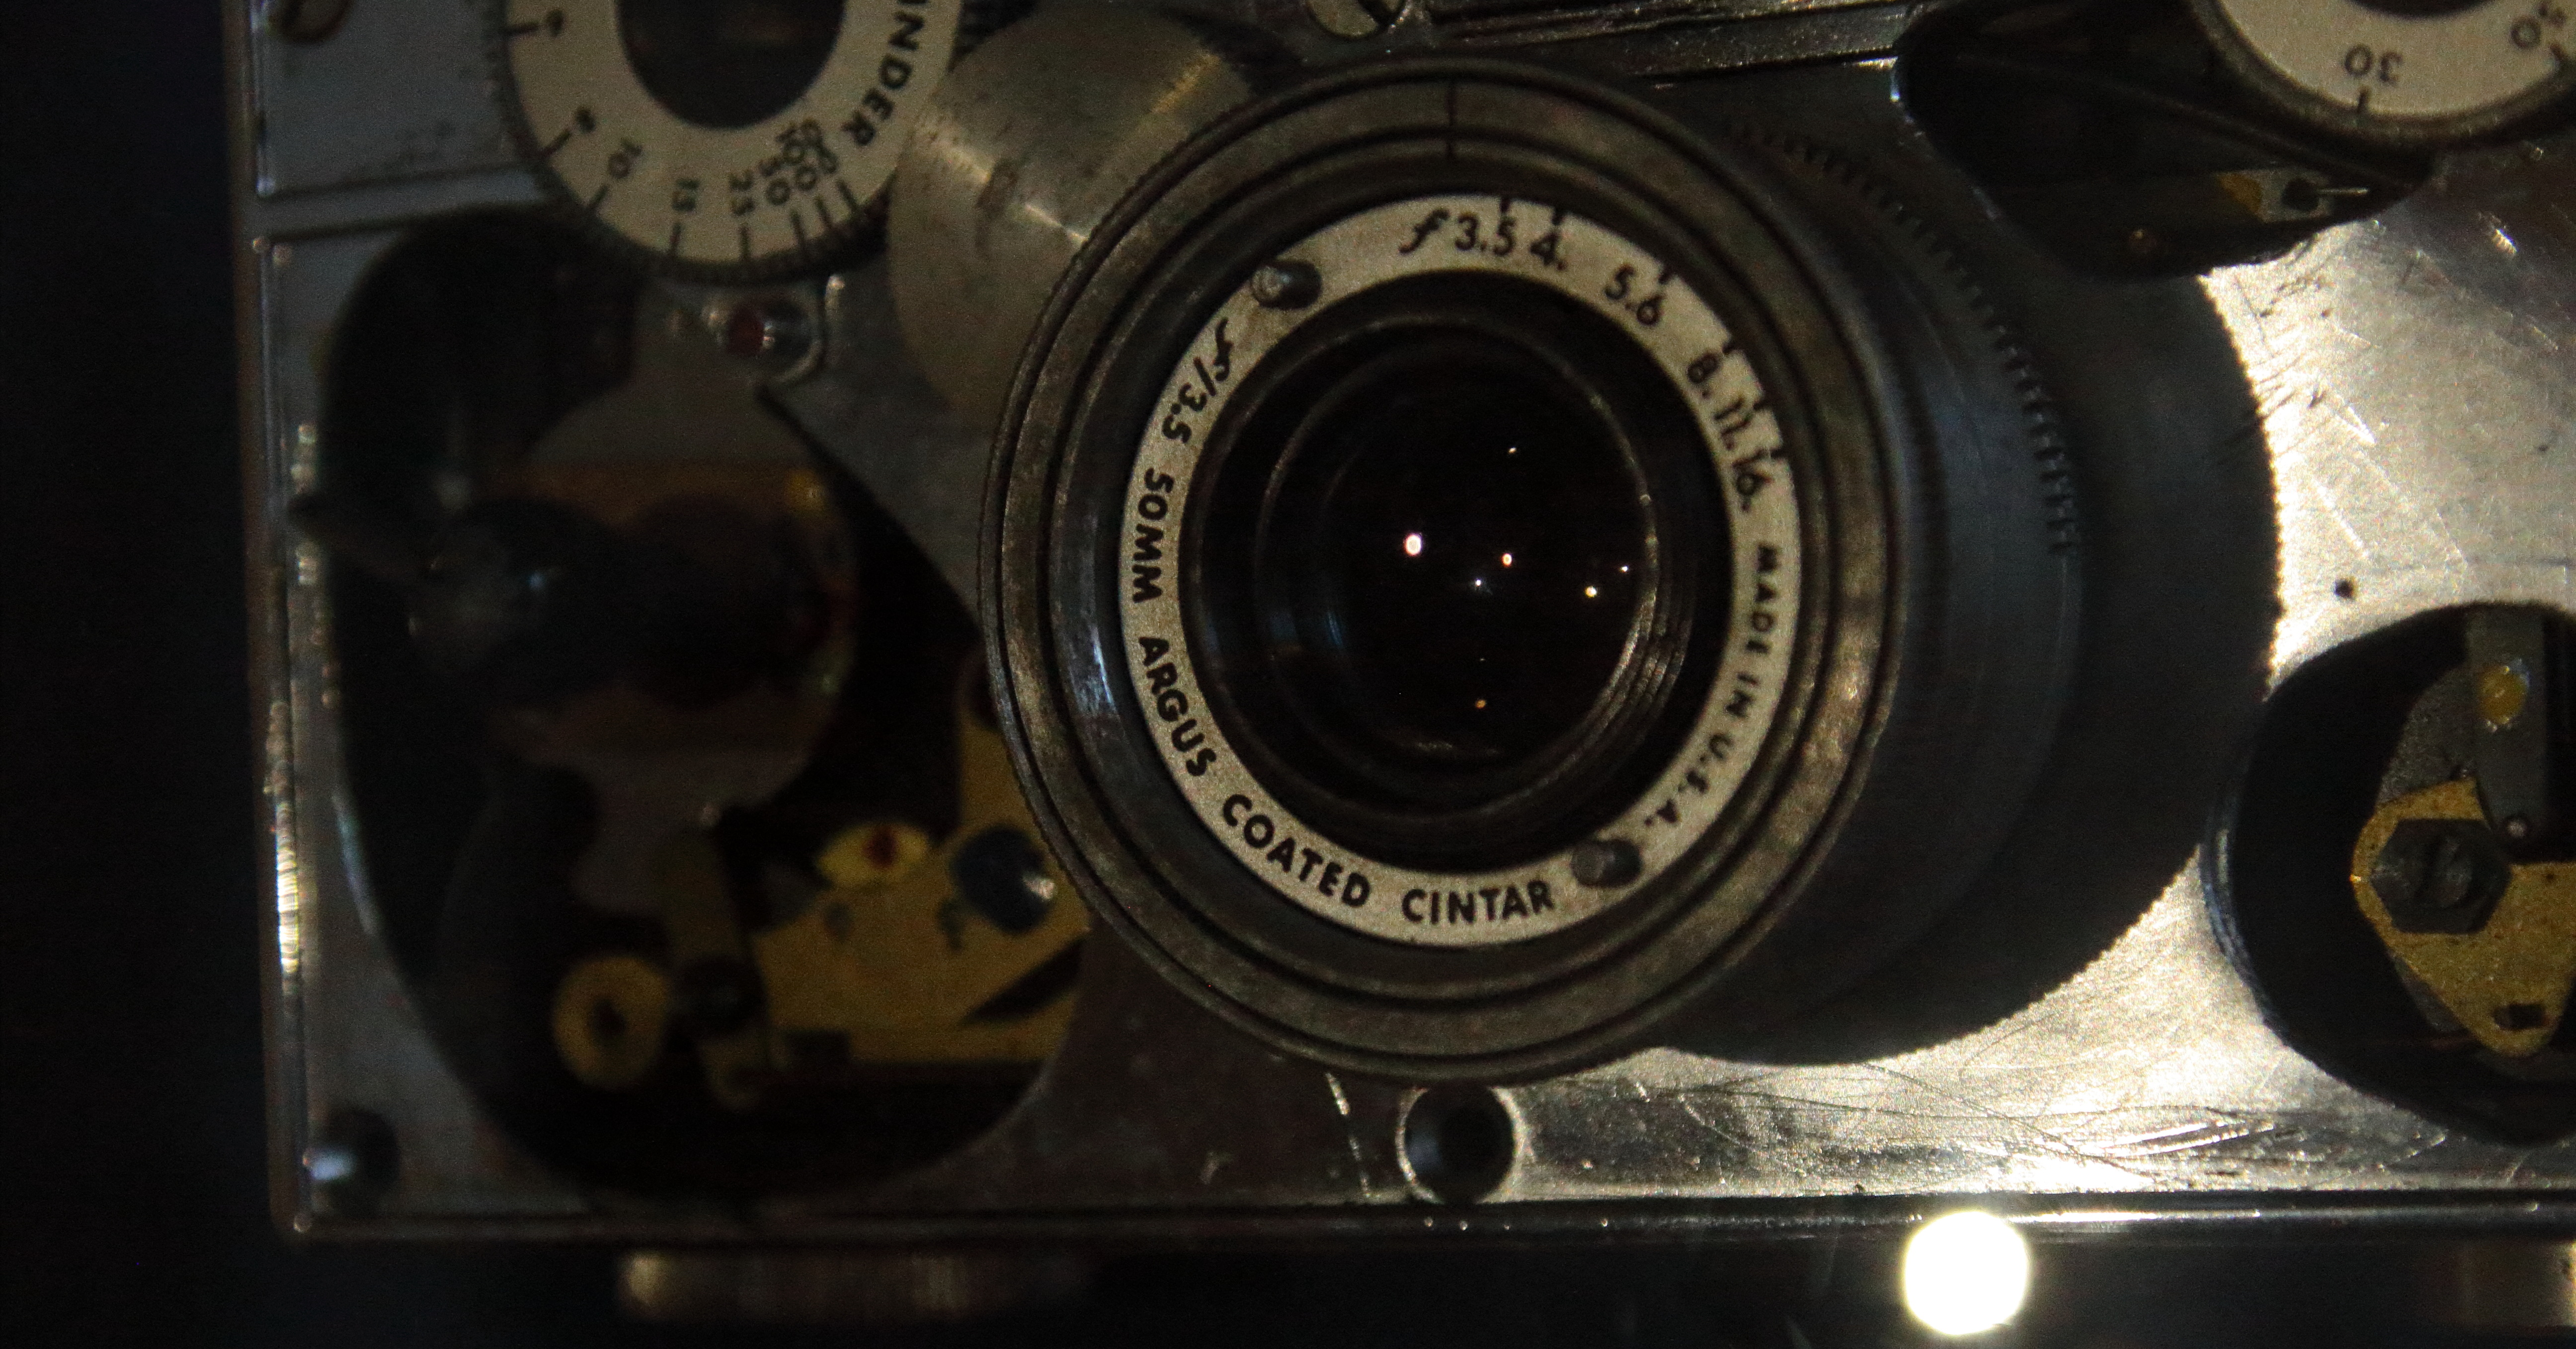 A picture of an Argus C3 Camera